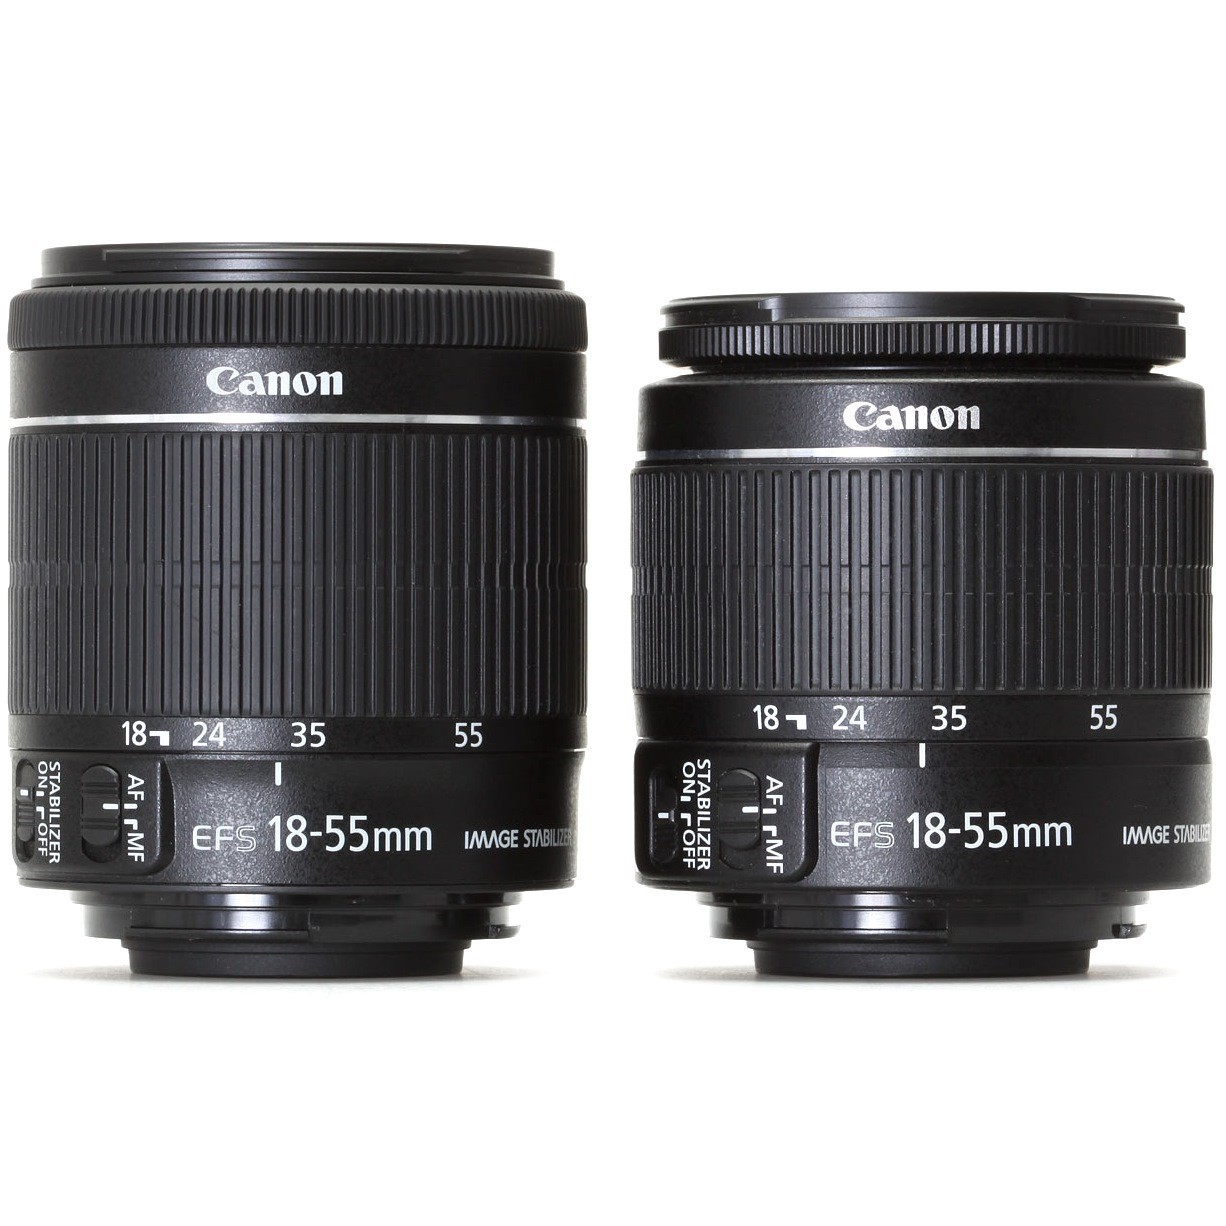 Canon ef s 18 55mm kit. Canon EF-S 18-55mm f/3.5-5.6. Объектив Canon 18-55mm. Объектив Canon EF-S 18-55mm f/3.5-5.6 is STM. Canon EF-S 18-55 мм.